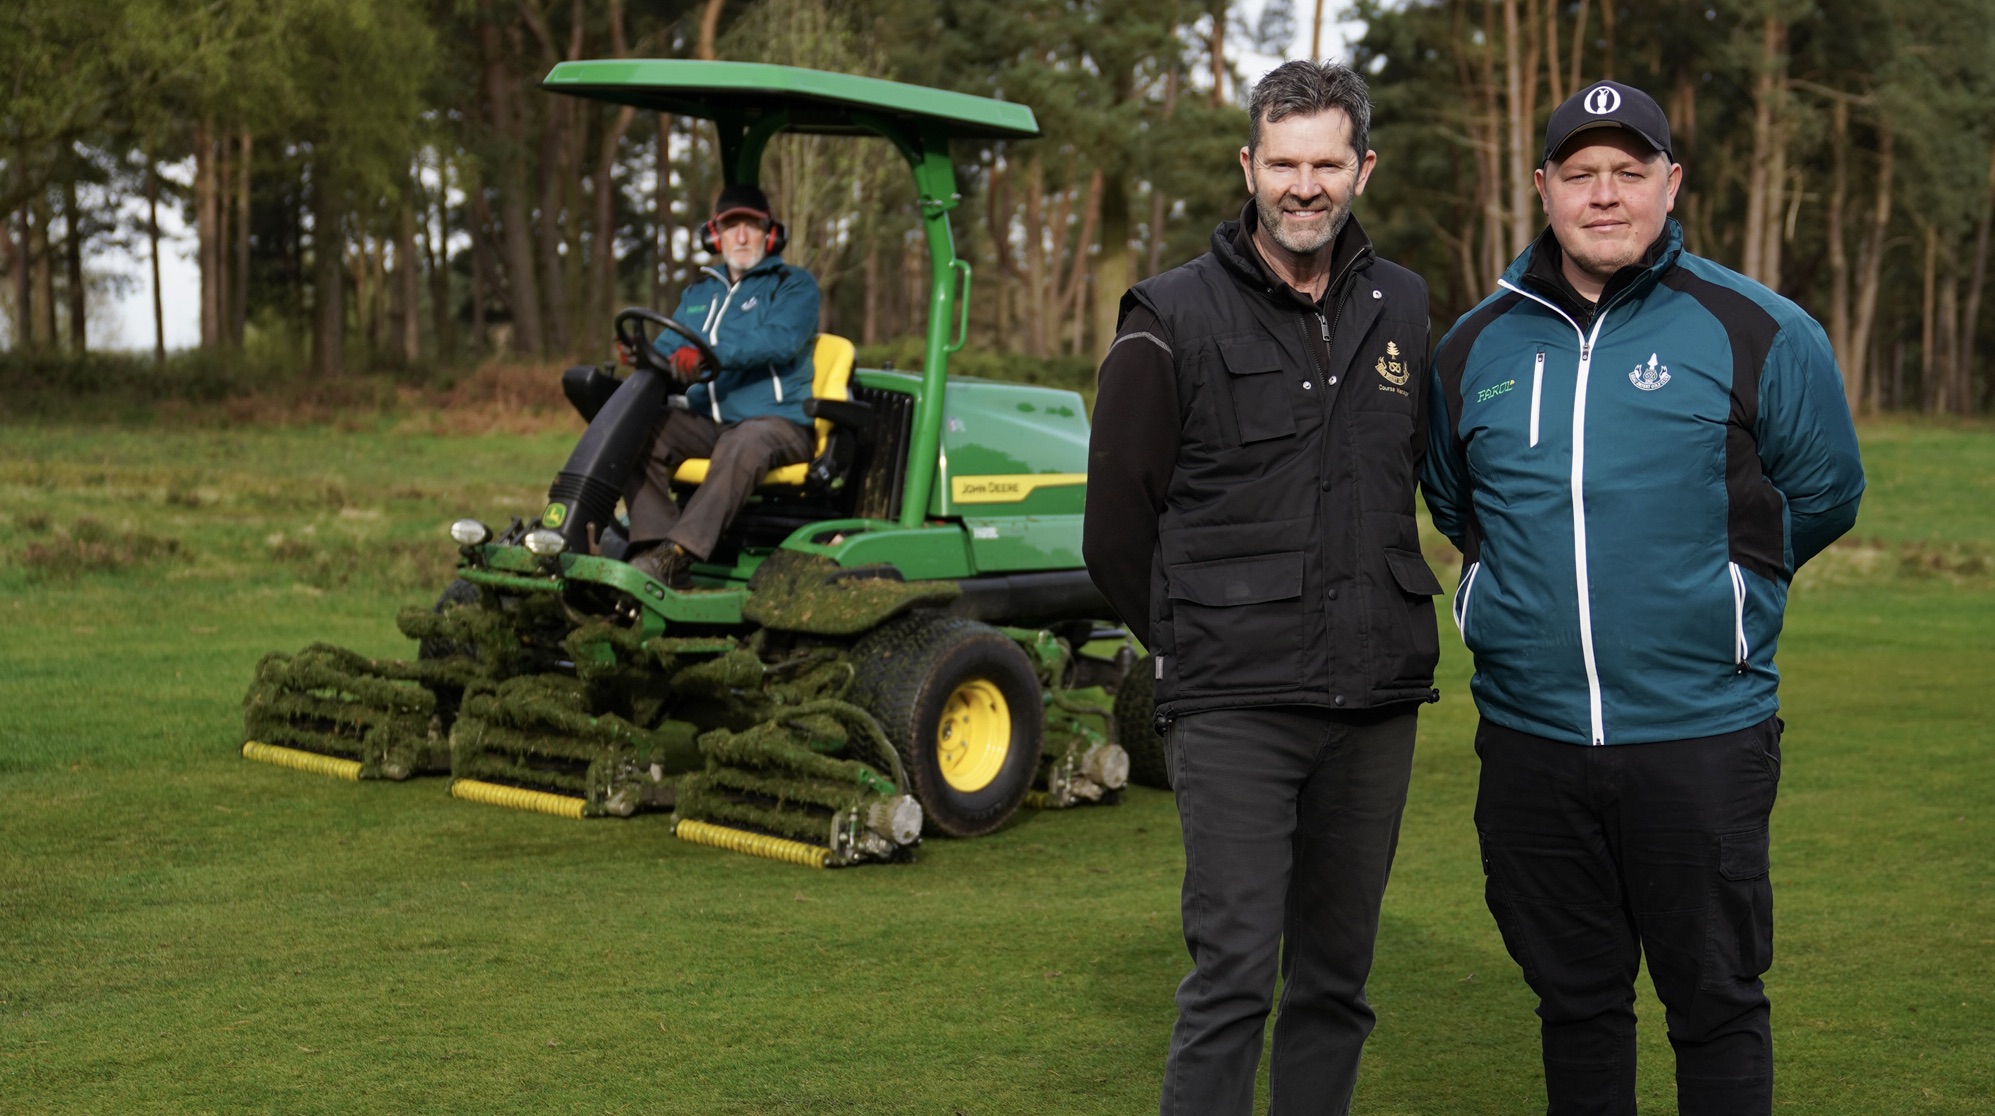 Steve Mucklow (left) and Luke Sheldon with one of the new fairway mowers 2